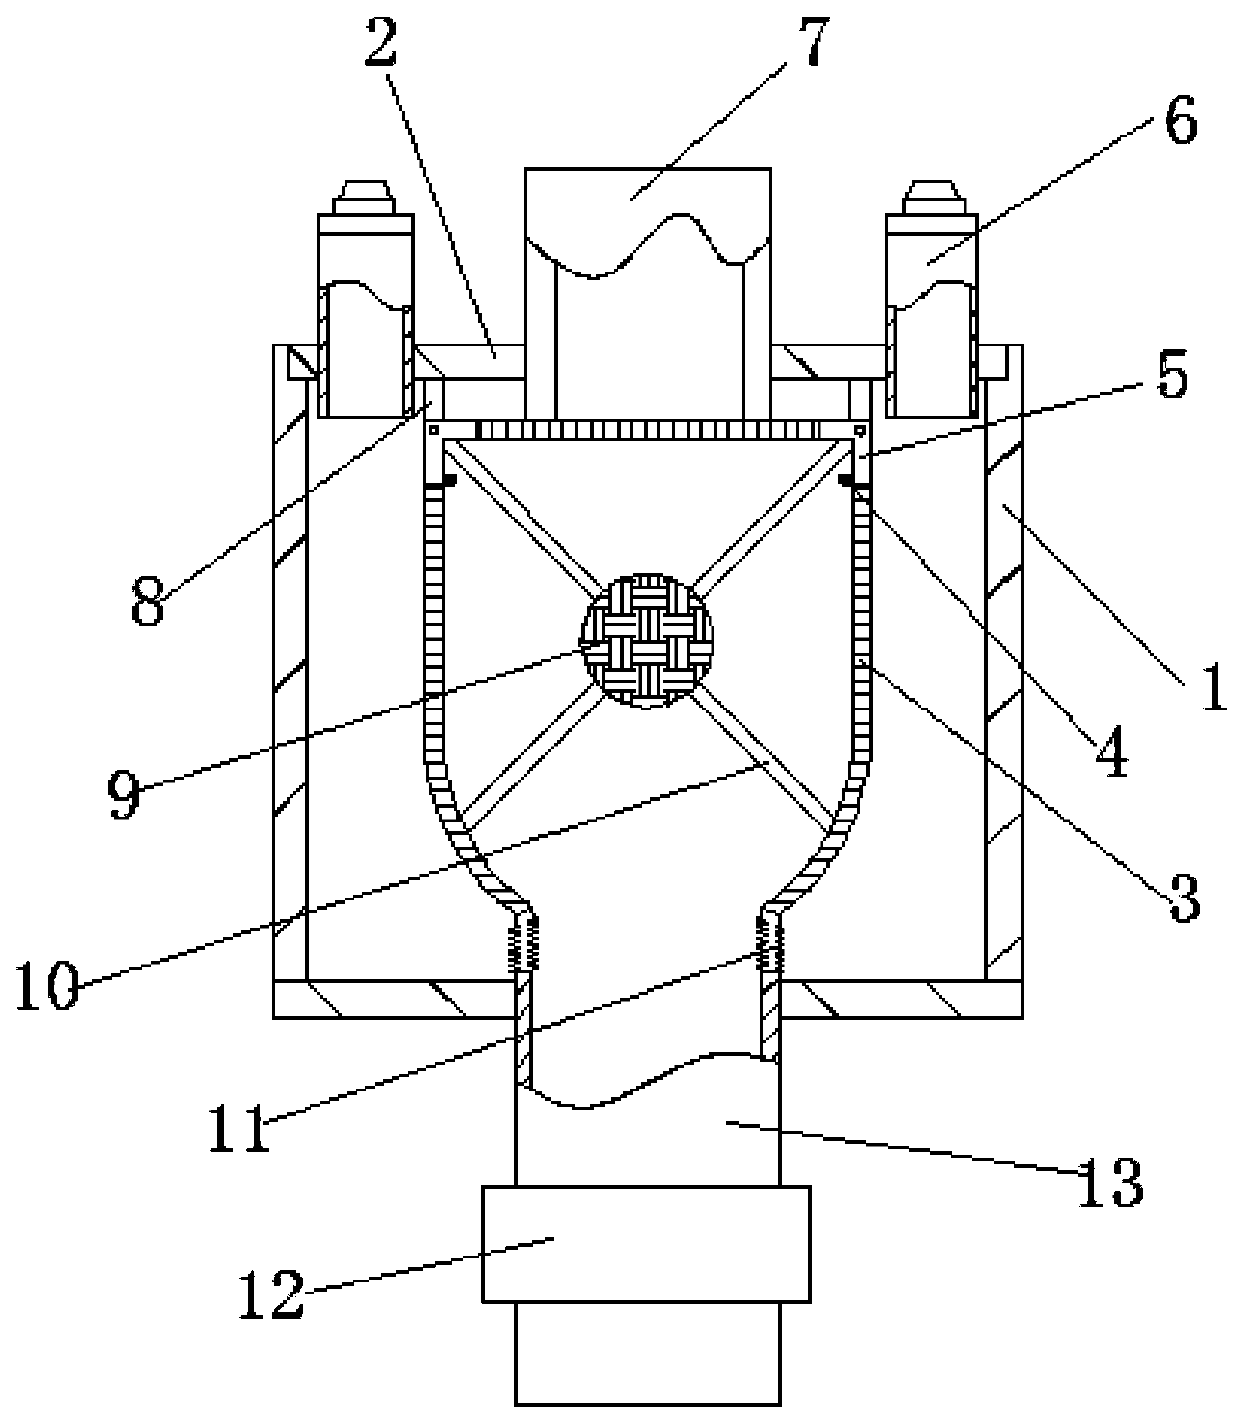 Pulverized coal filtering and collecting device for coalbed methane exploitation